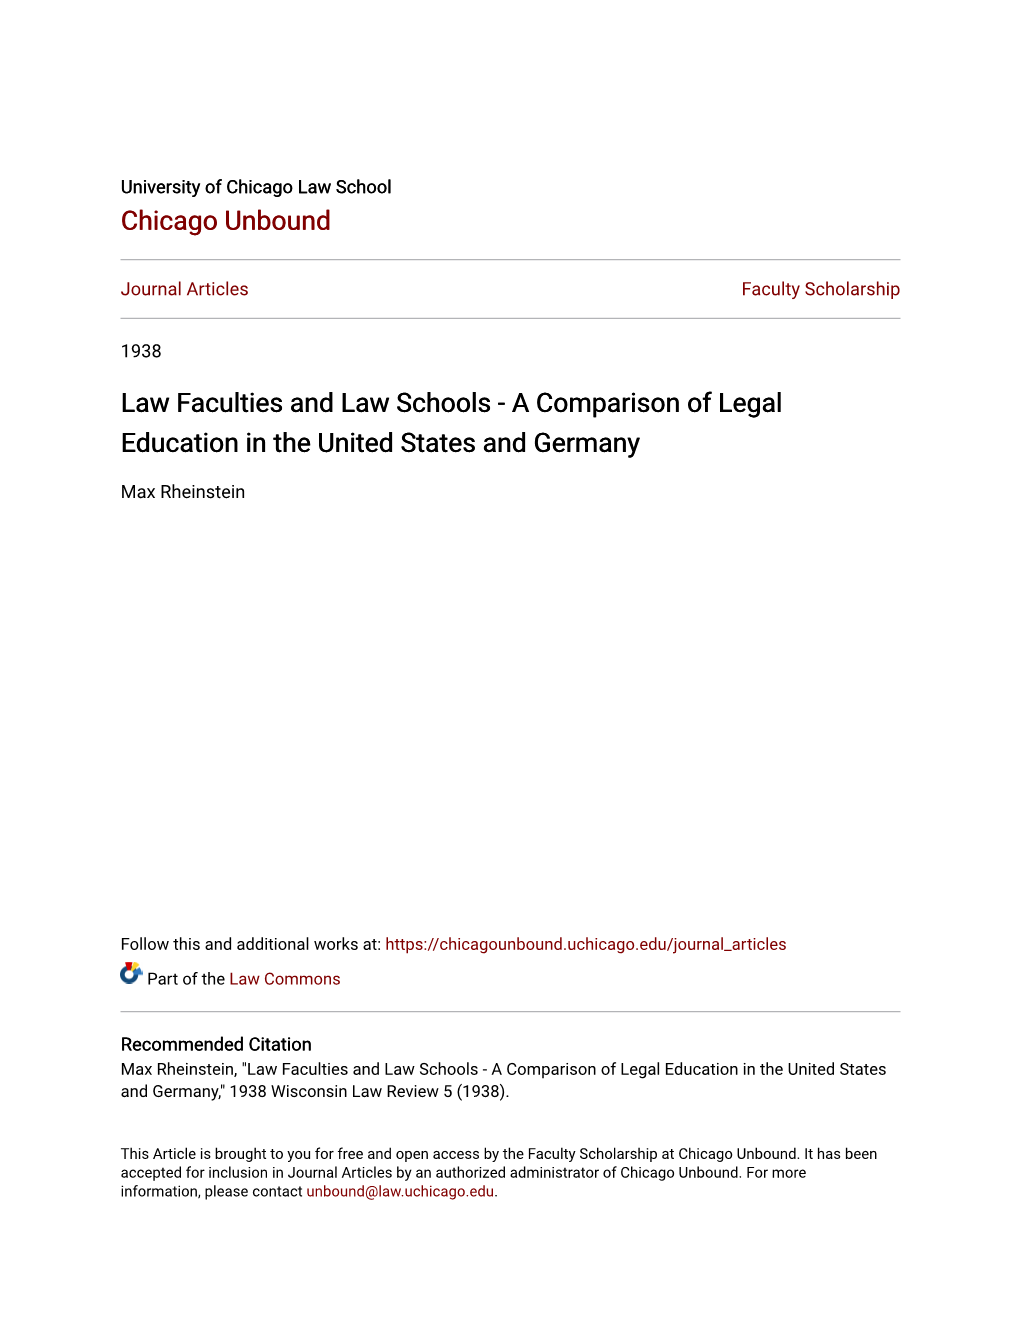 Law Faculties and Law Schools - a Comparison of Legal Education in the United States and Germany